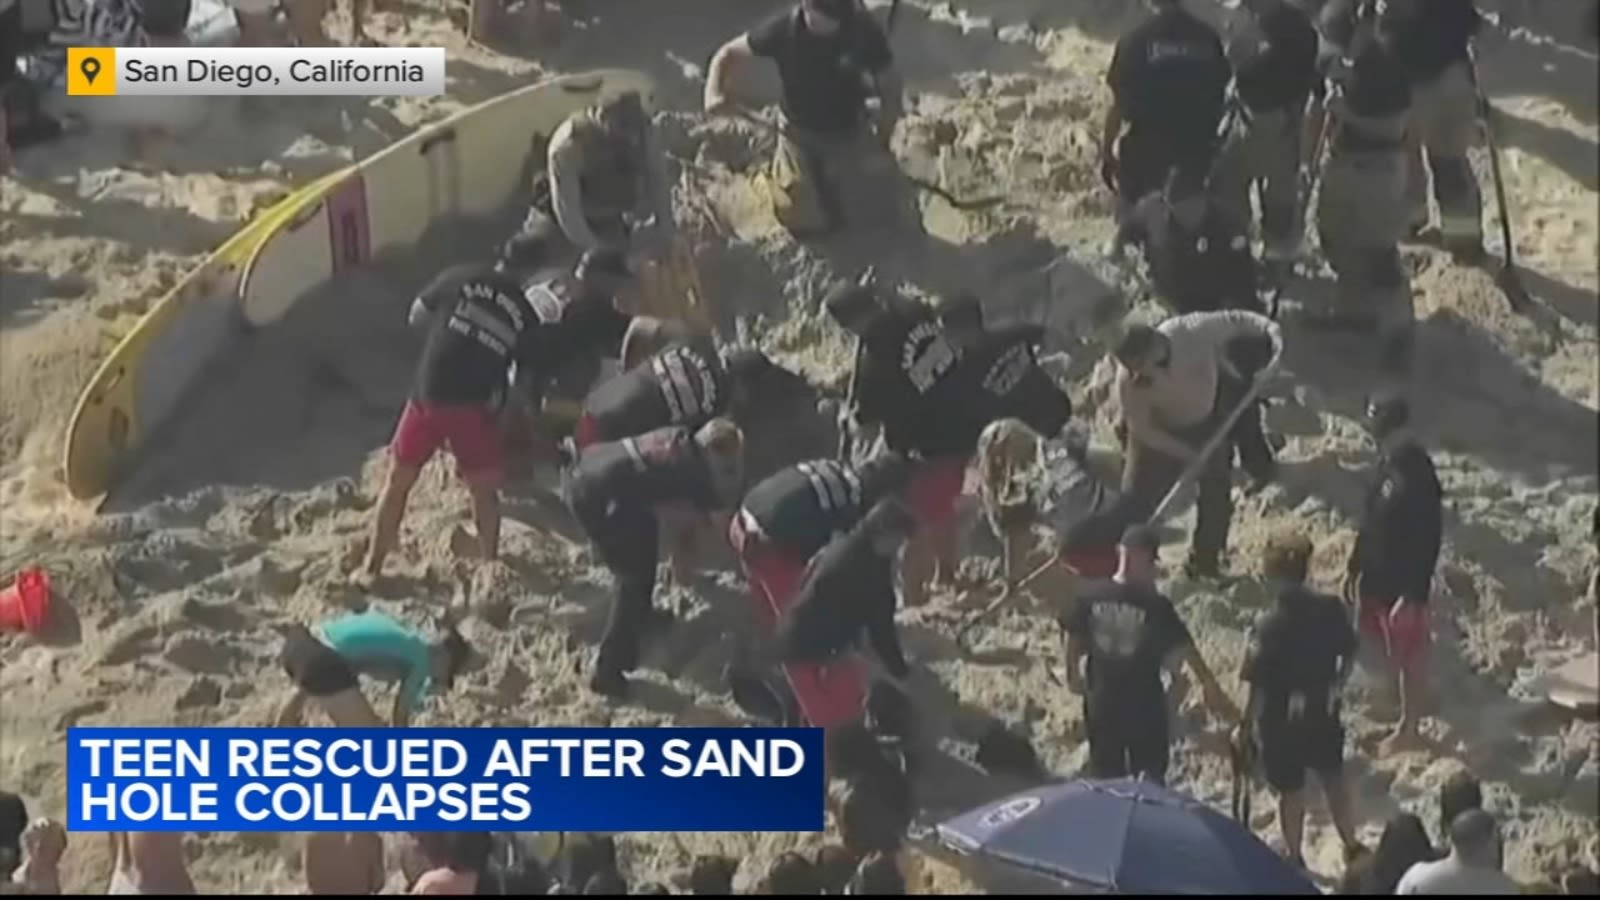 Teen rescued after sand hole collapse on San Diego beach